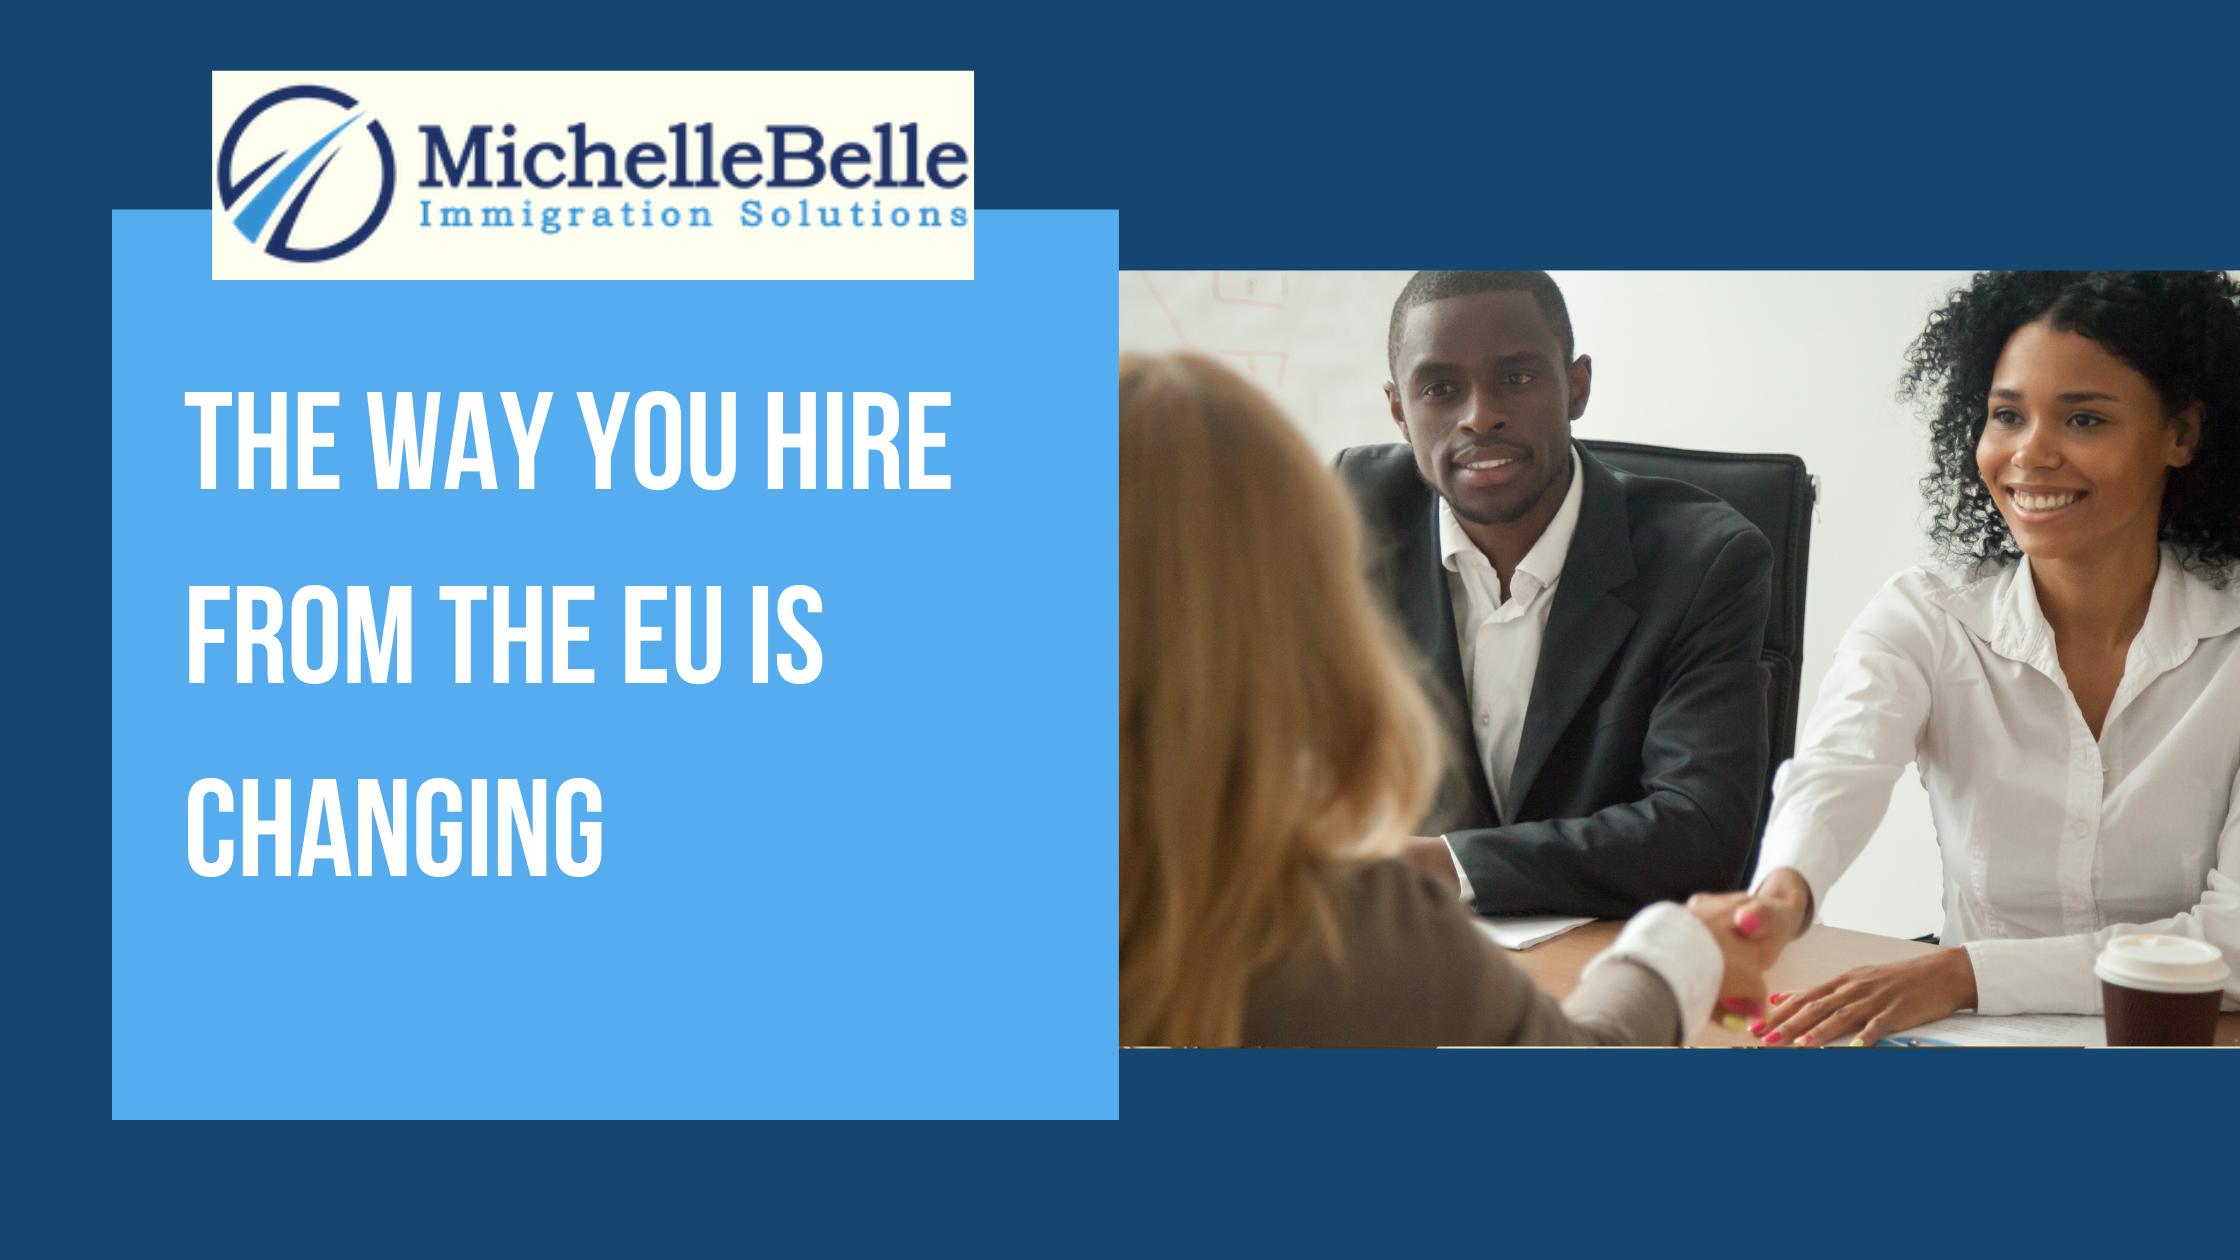 You are currently viewing If you are thinking of hiring from the EU Next year, then beware as the way you hire from the EU is changing